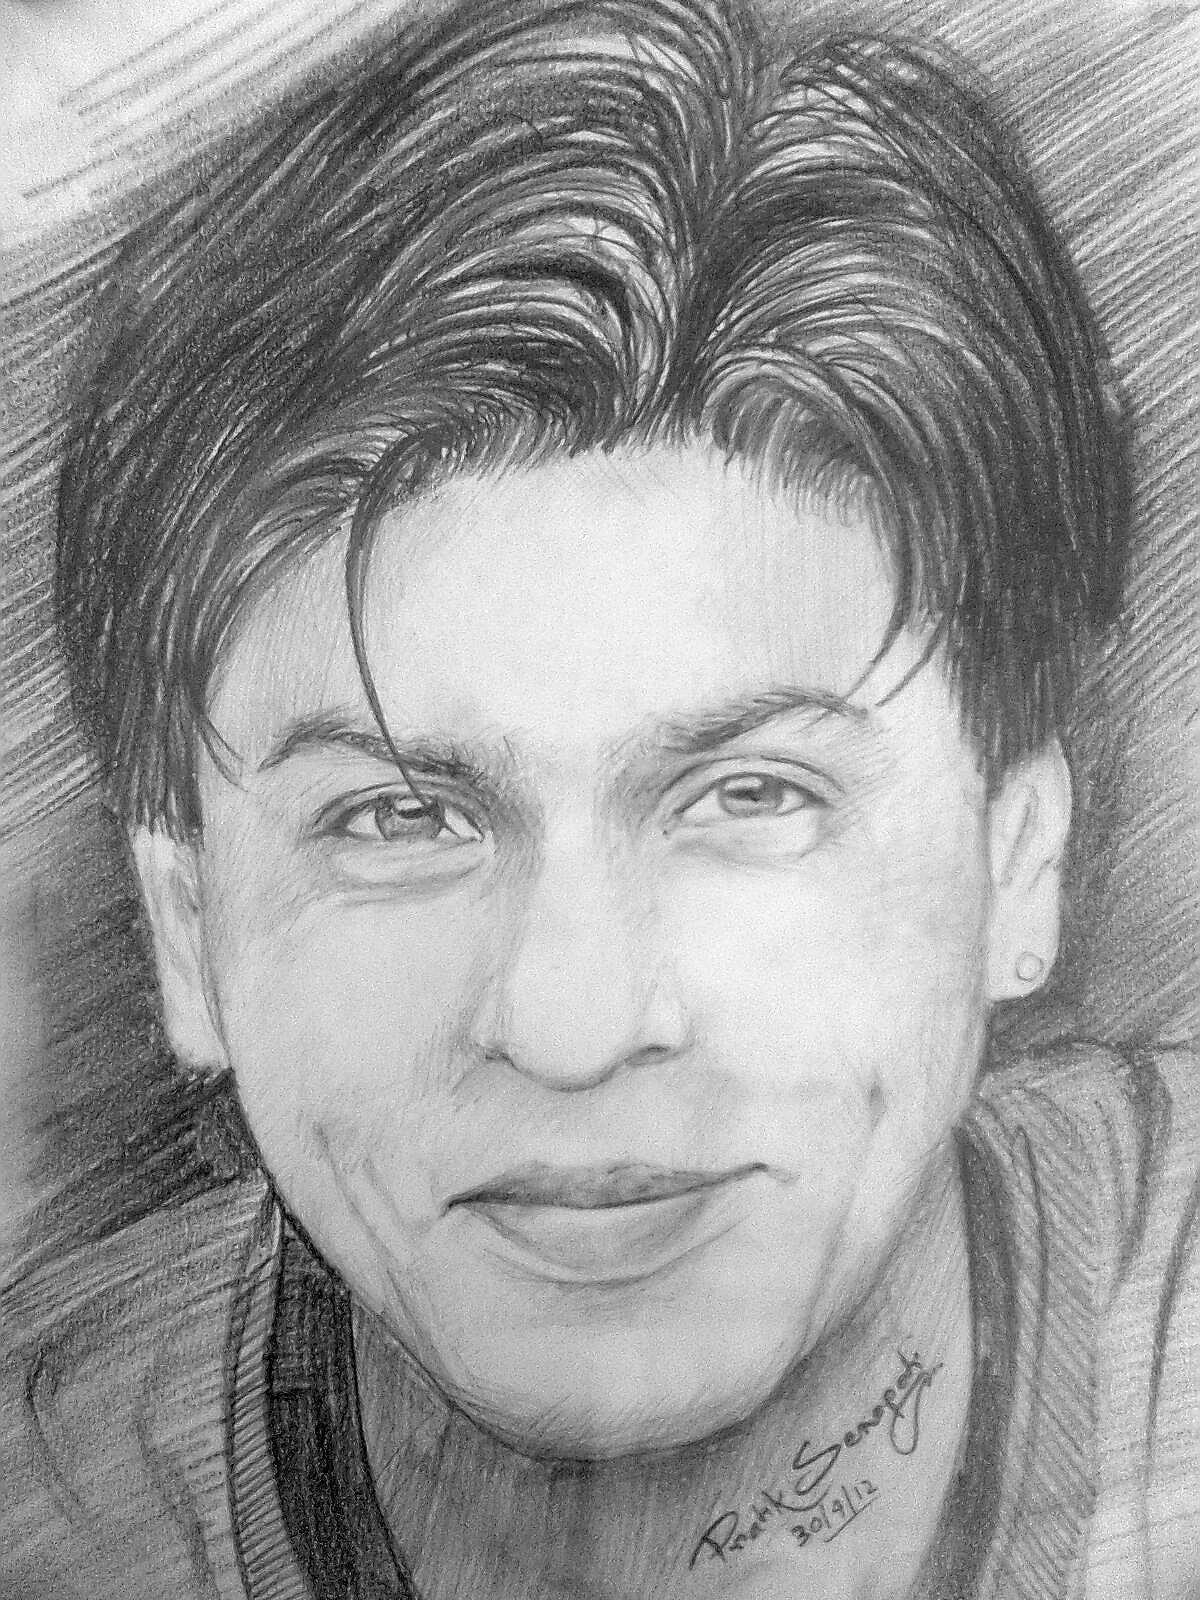 Sketch of SRK from mohabbatein | Celebrity drawings, Celebrity artwork,  Portrait sketches